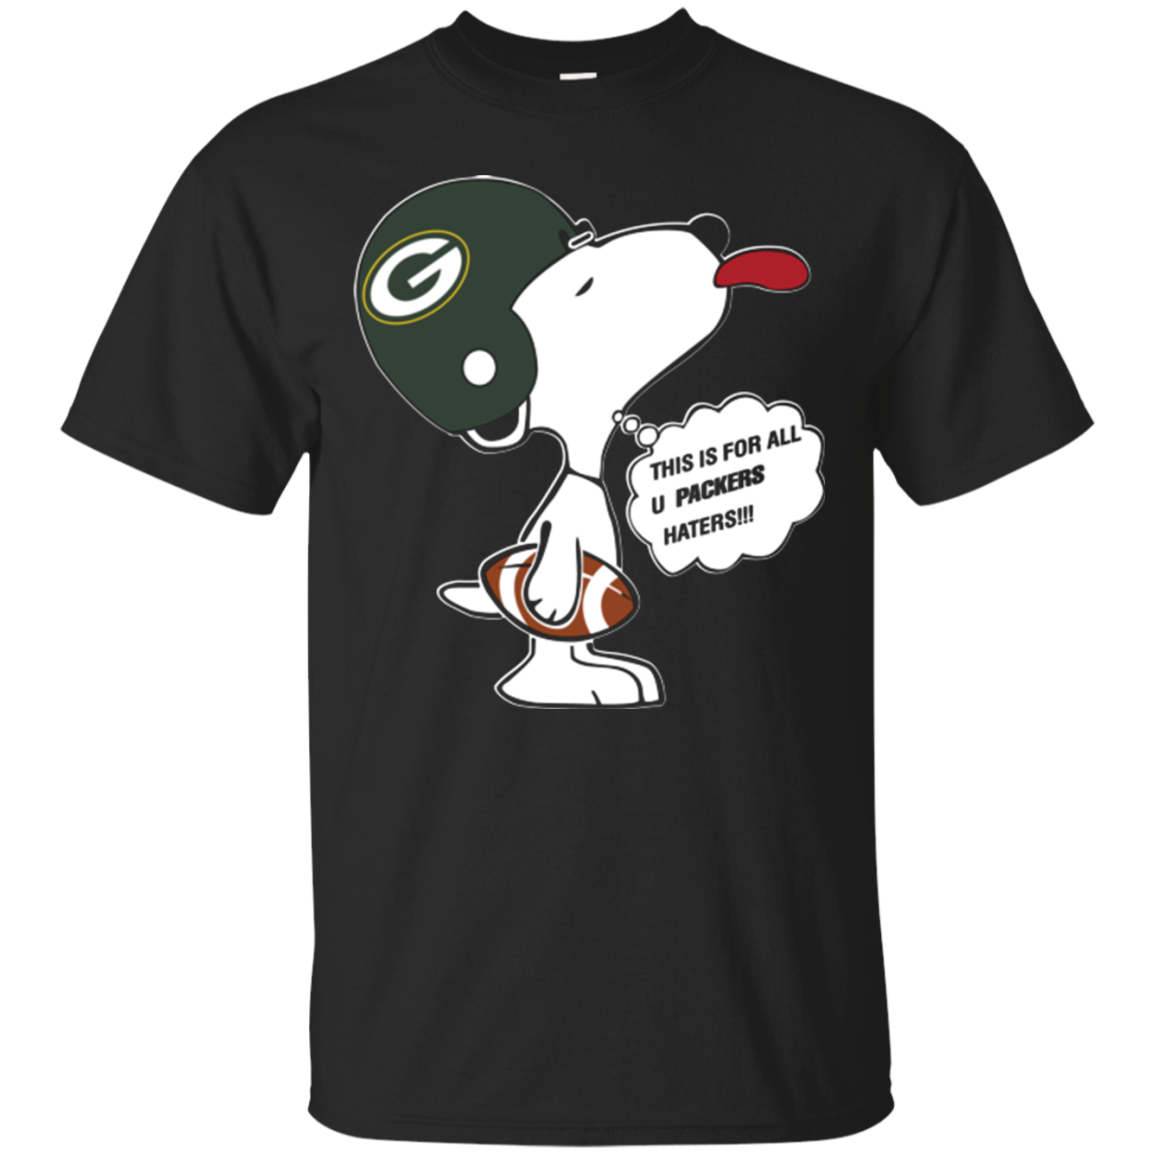 This Is For All U Packers Haters Green Bay Packers Snoopy Shirts ...